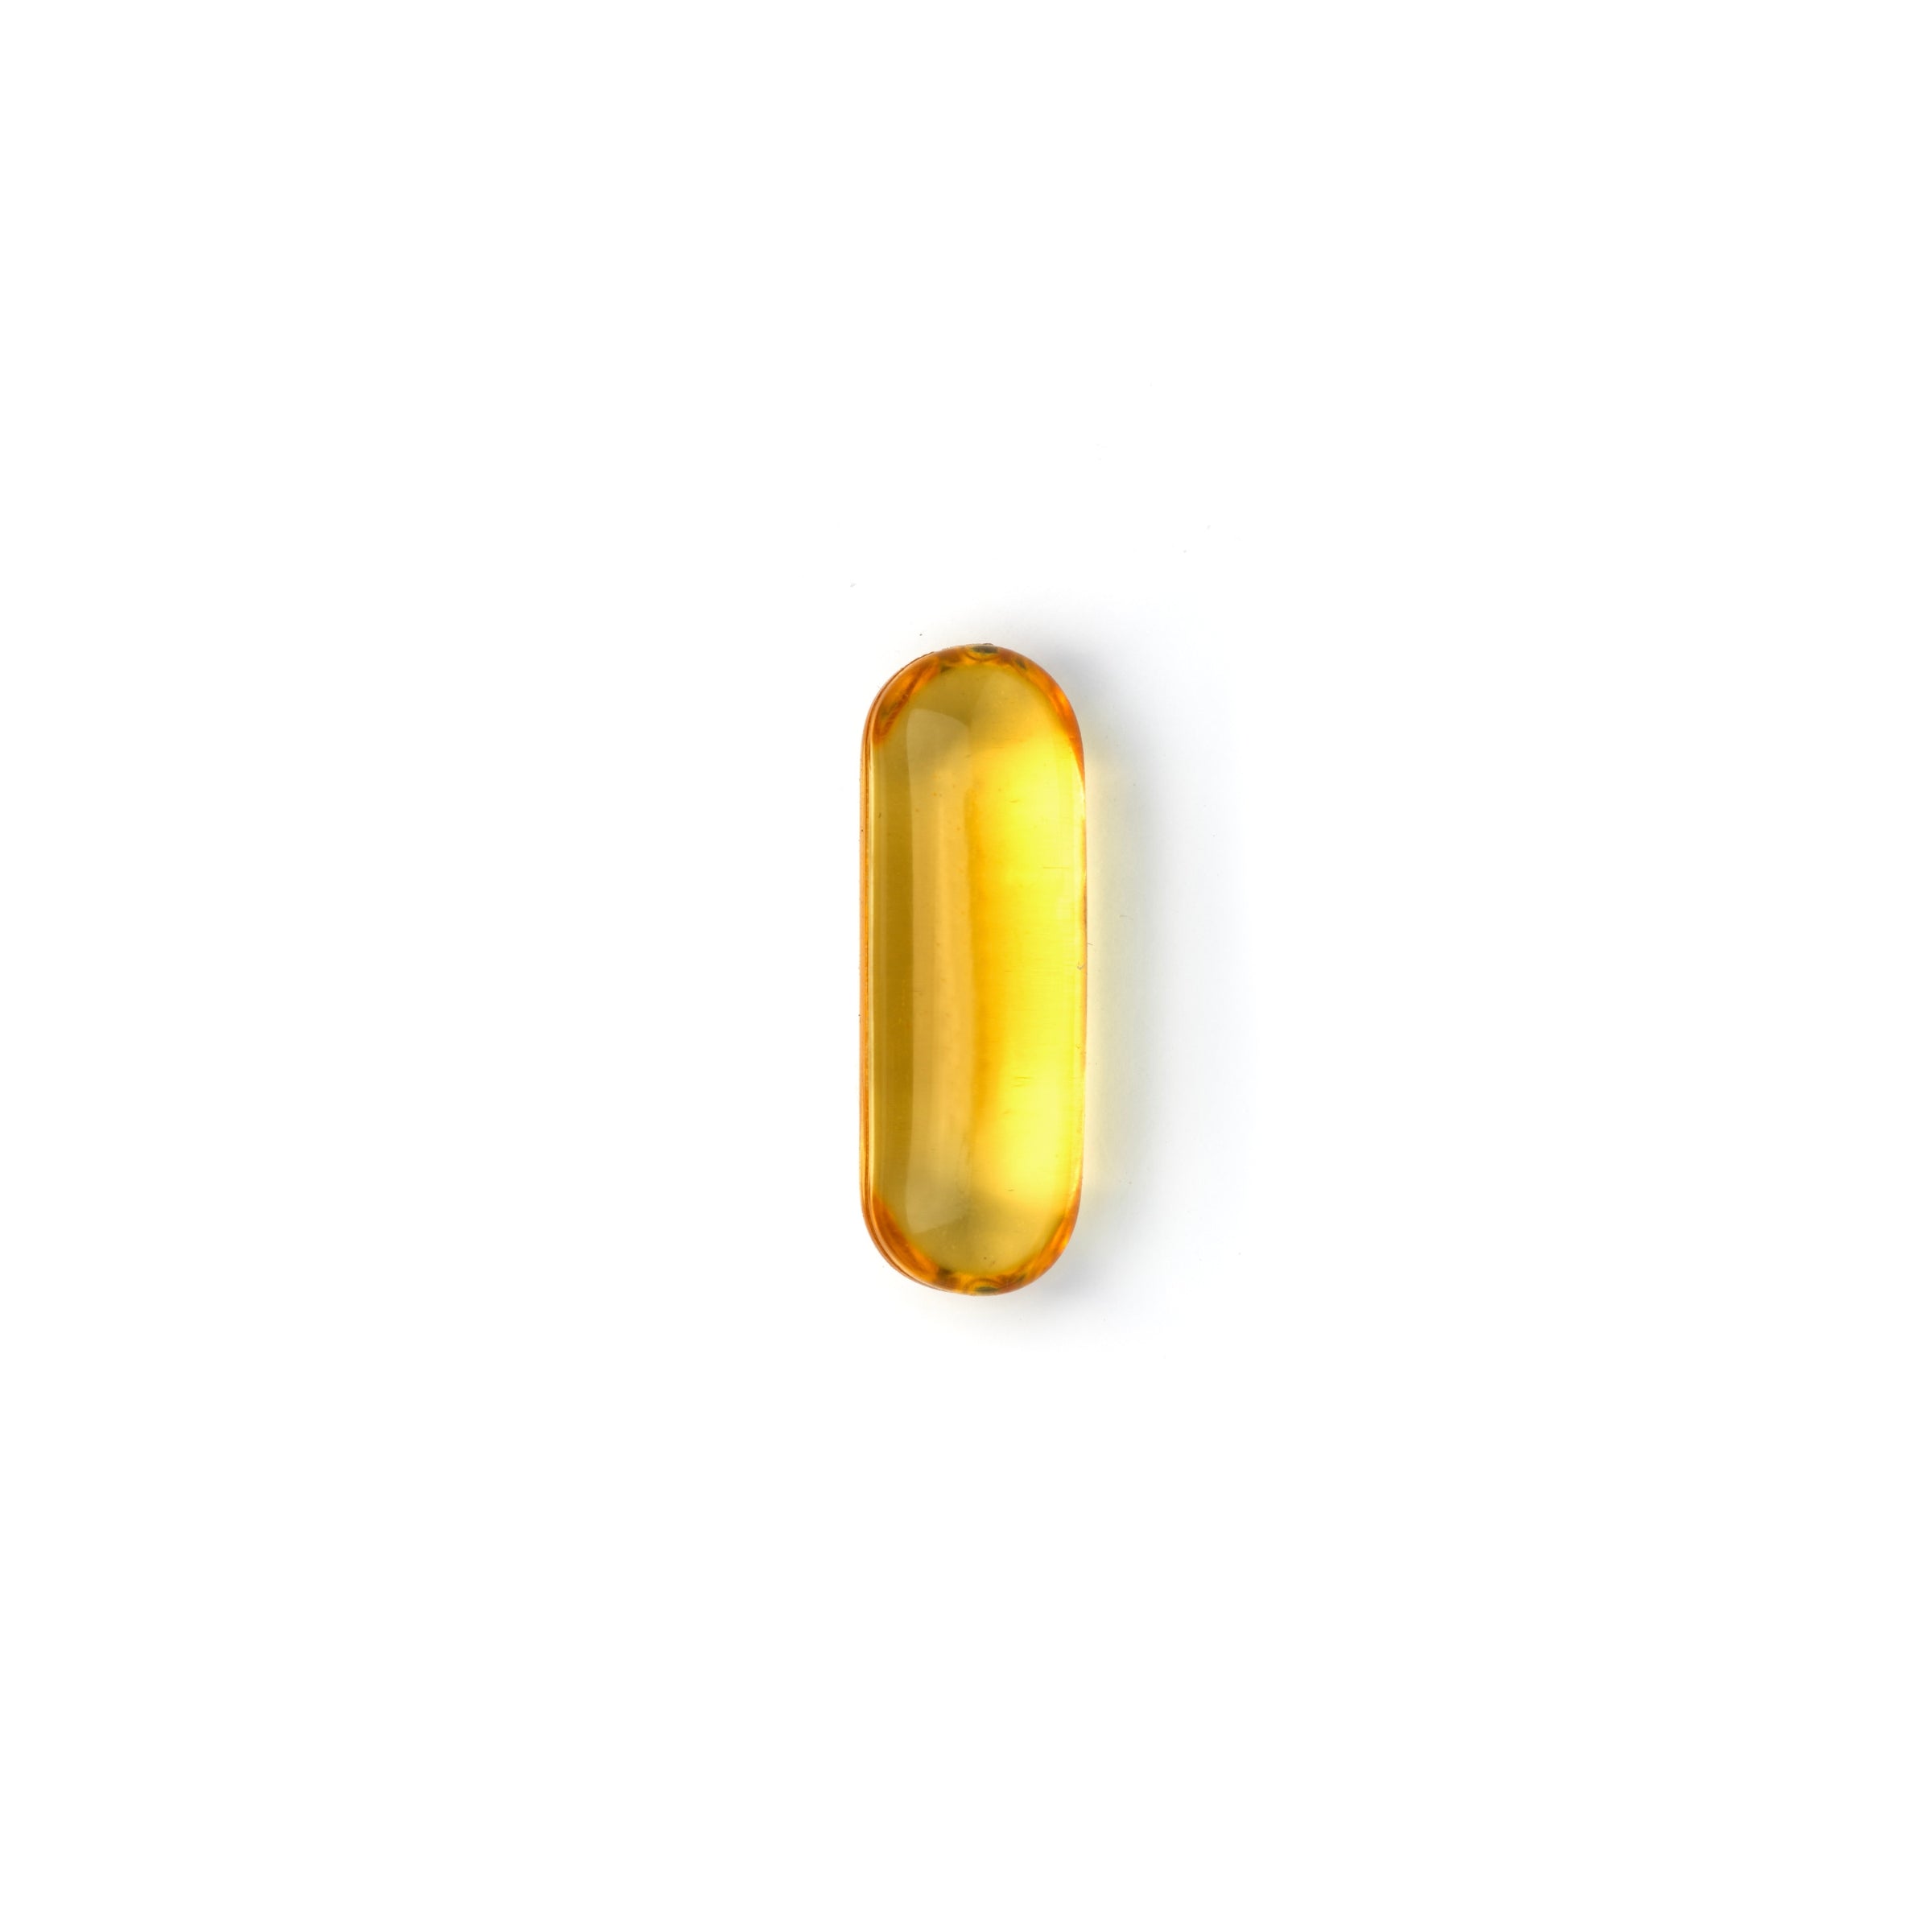 Ethical Nutrients High Strength Omega 3 Capsule